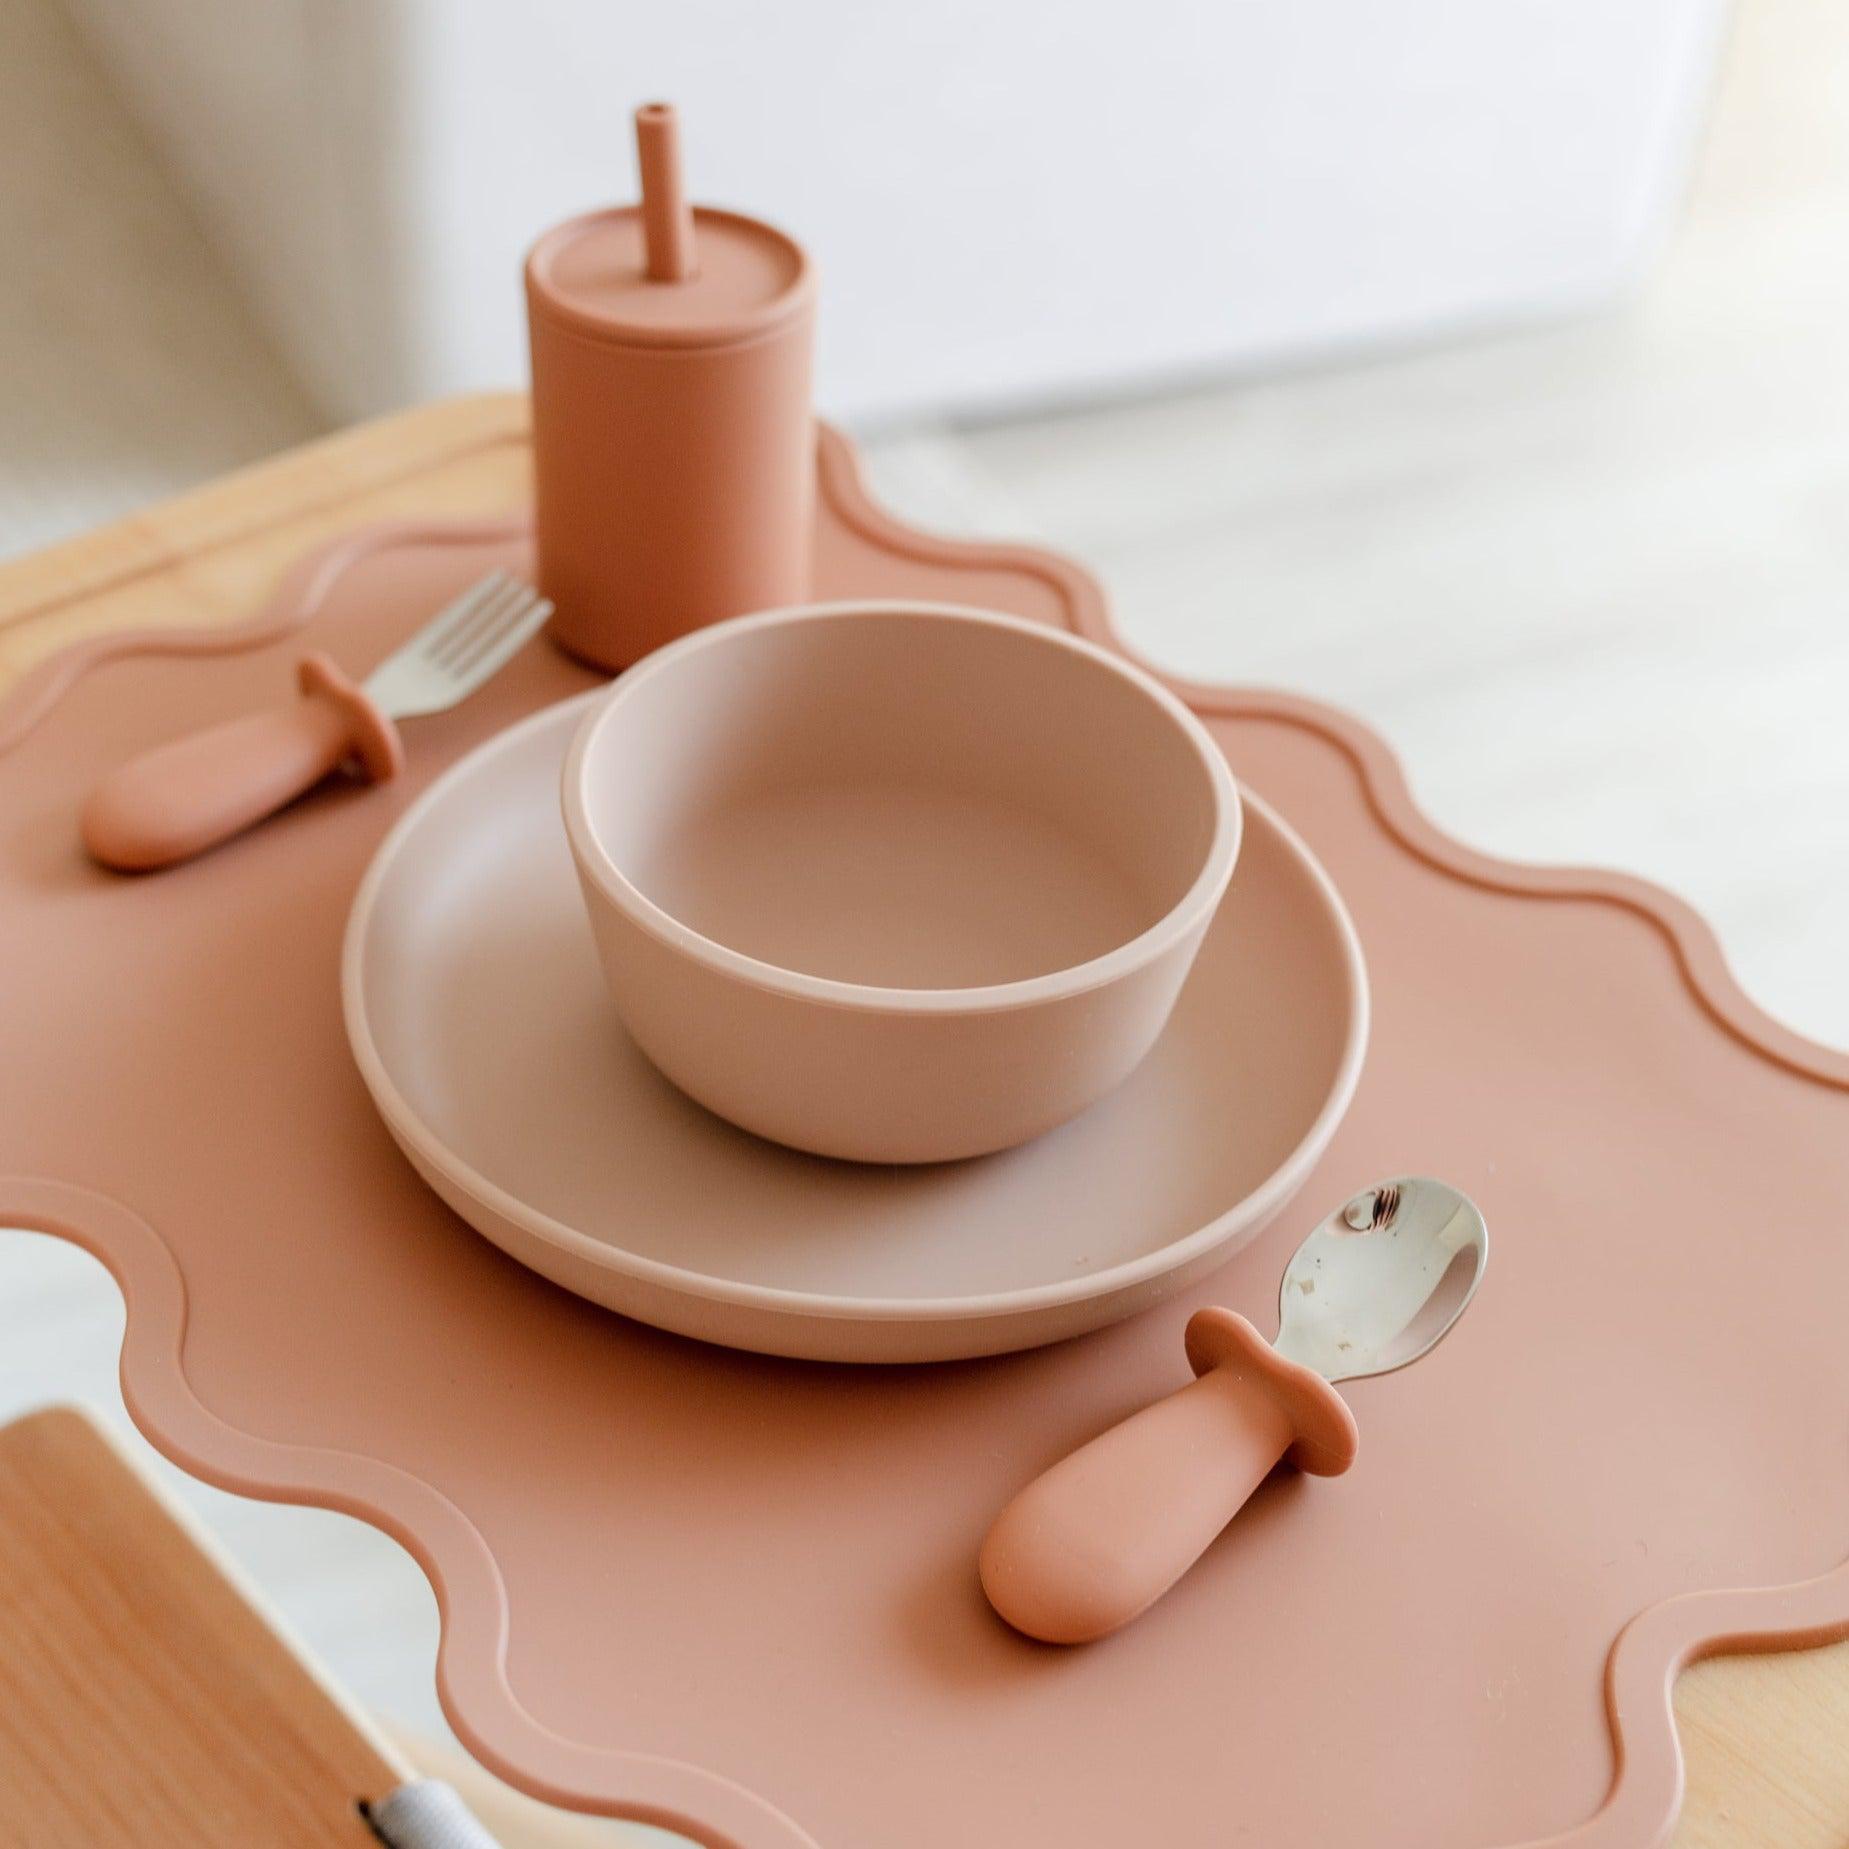 A Wiggly Placemat in cinnamon by Rommer, with a pink plate, spoon, and fork on a table.